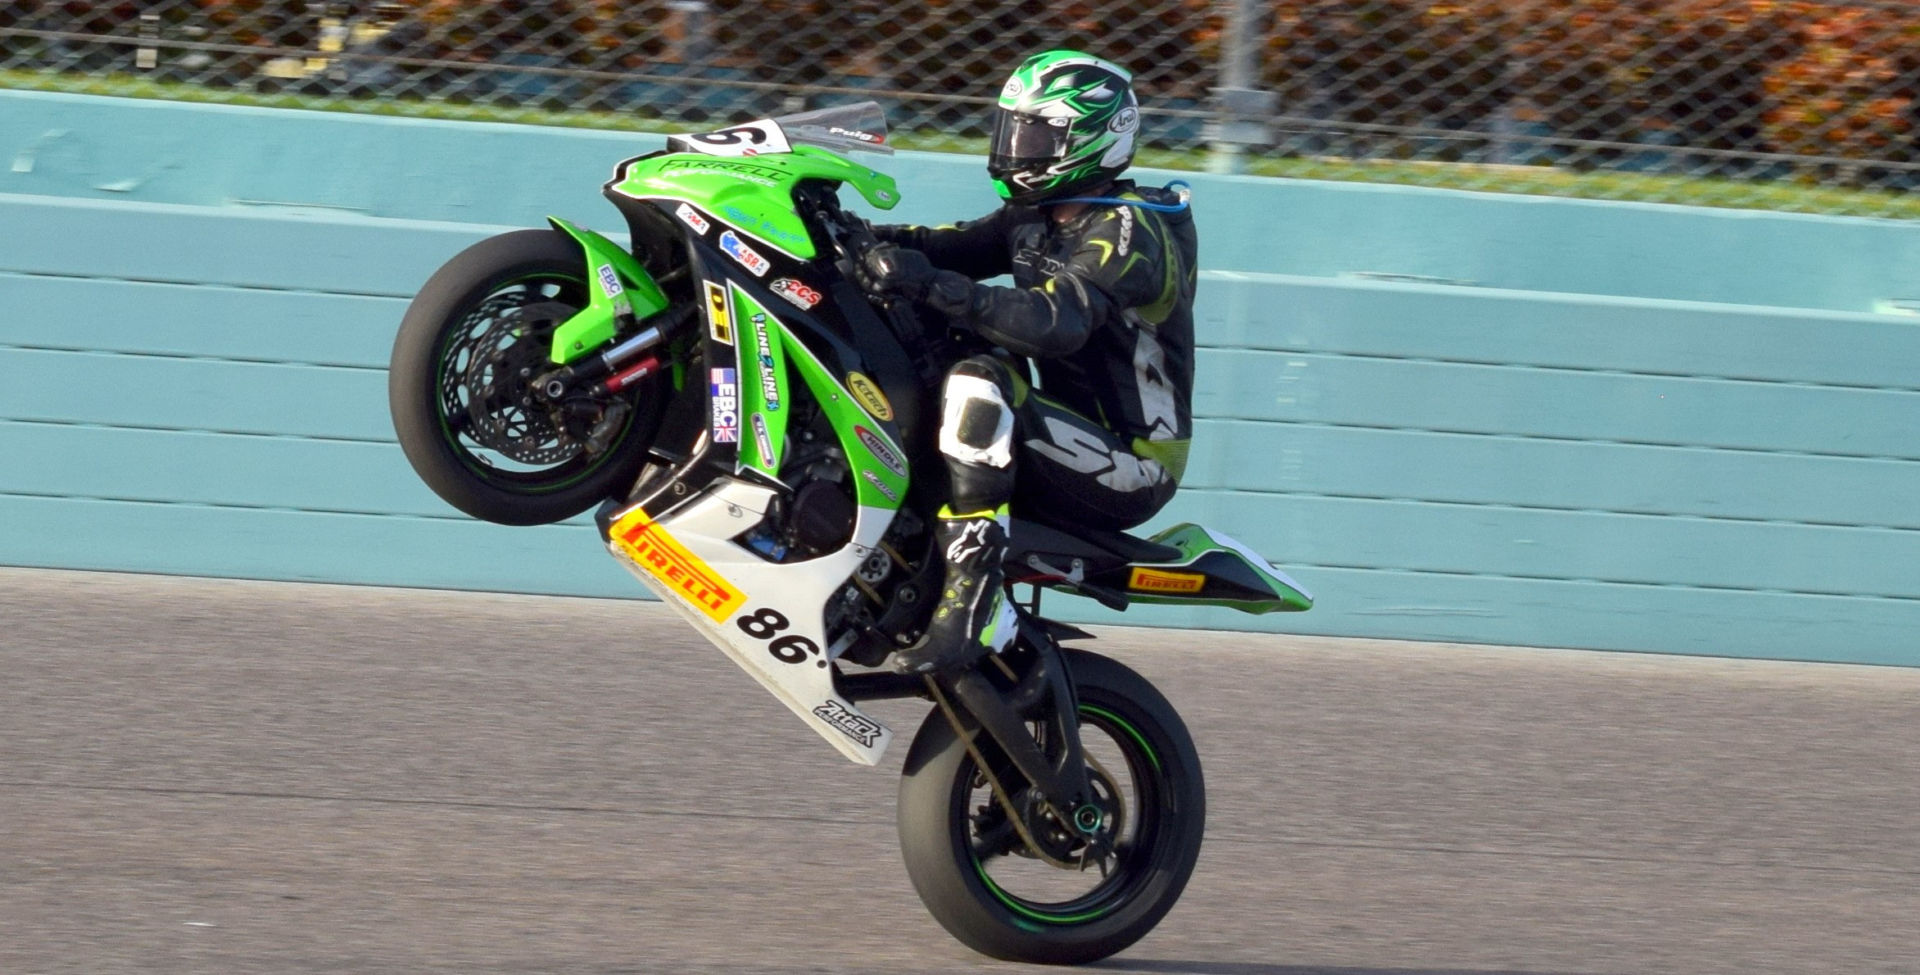 Jason Farrell (86) wheelies the Farrell Performance Kawasaki ZX-10R to the checkered flag in the ASRA Team Challenge at Homestead-Miami Speedway. Photo by Rick Hentz.